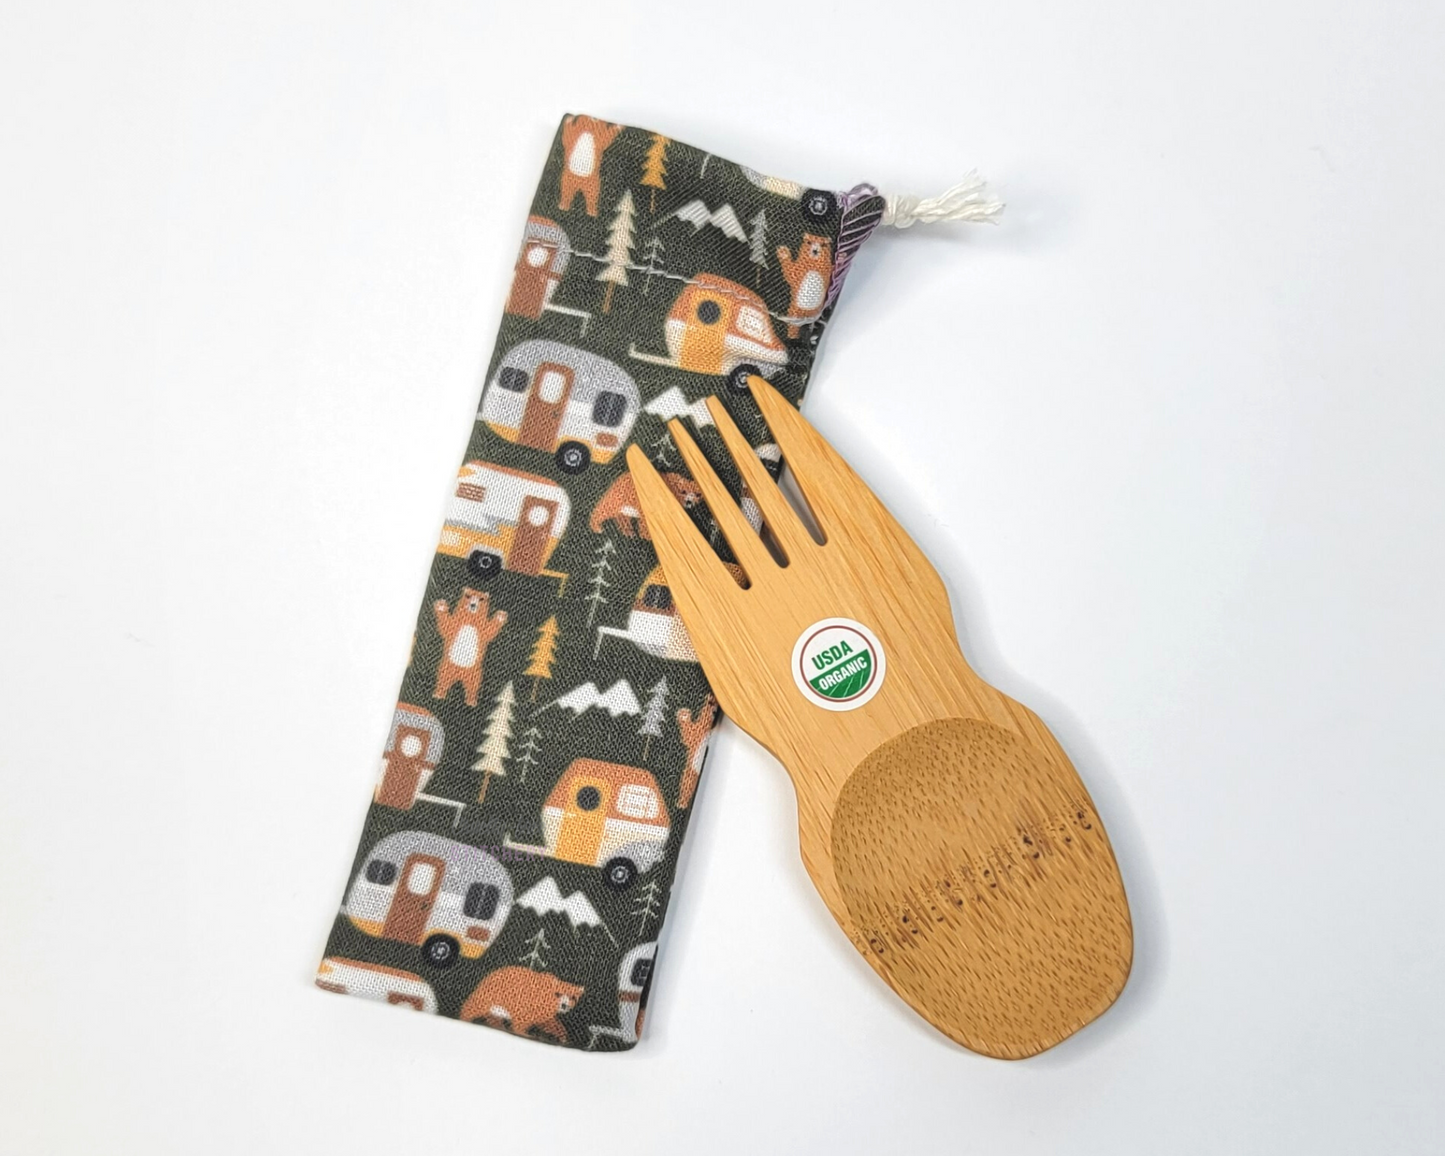 Reusable bamboo spork with pouch. The pouch is a dark green with vintage style campers, trees, and bears. The pouch is sitting diagonally with the spork partially on top pointing the other way. The spork is small, a double ended fork and spoon.